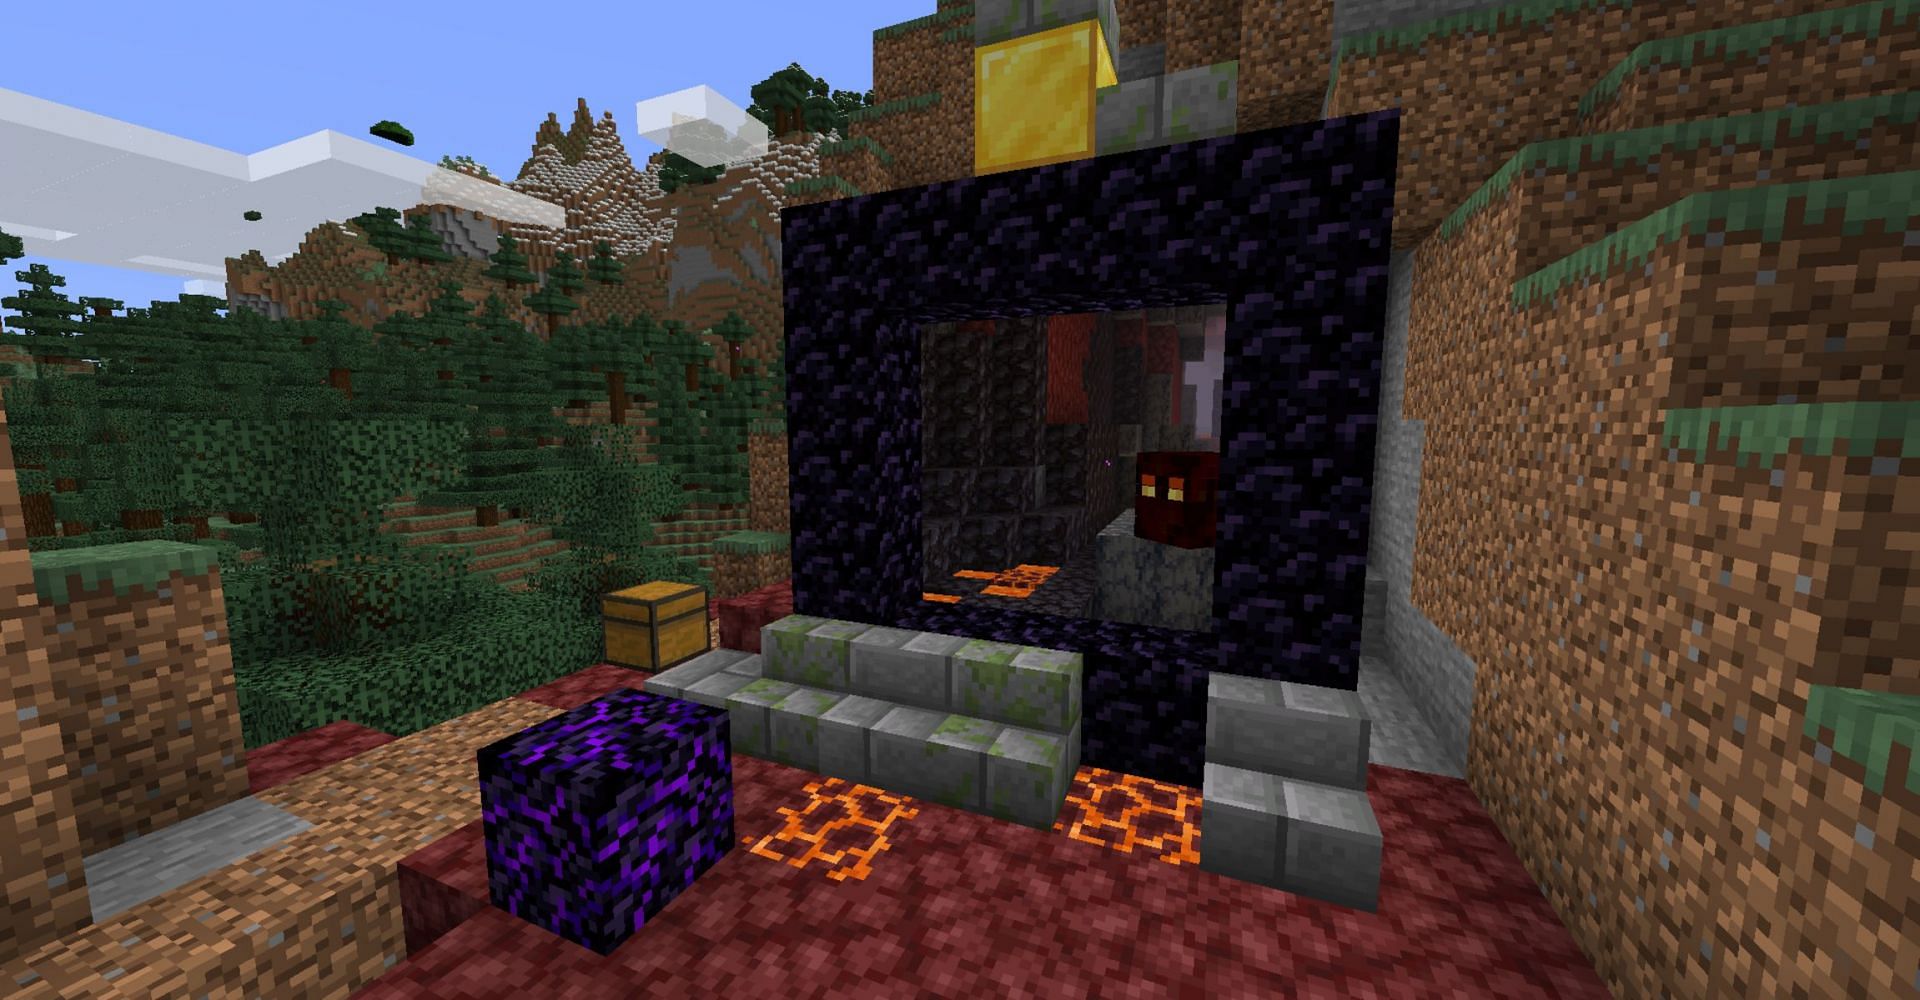 How To Use The Immersive Portals Mod In Minecraft